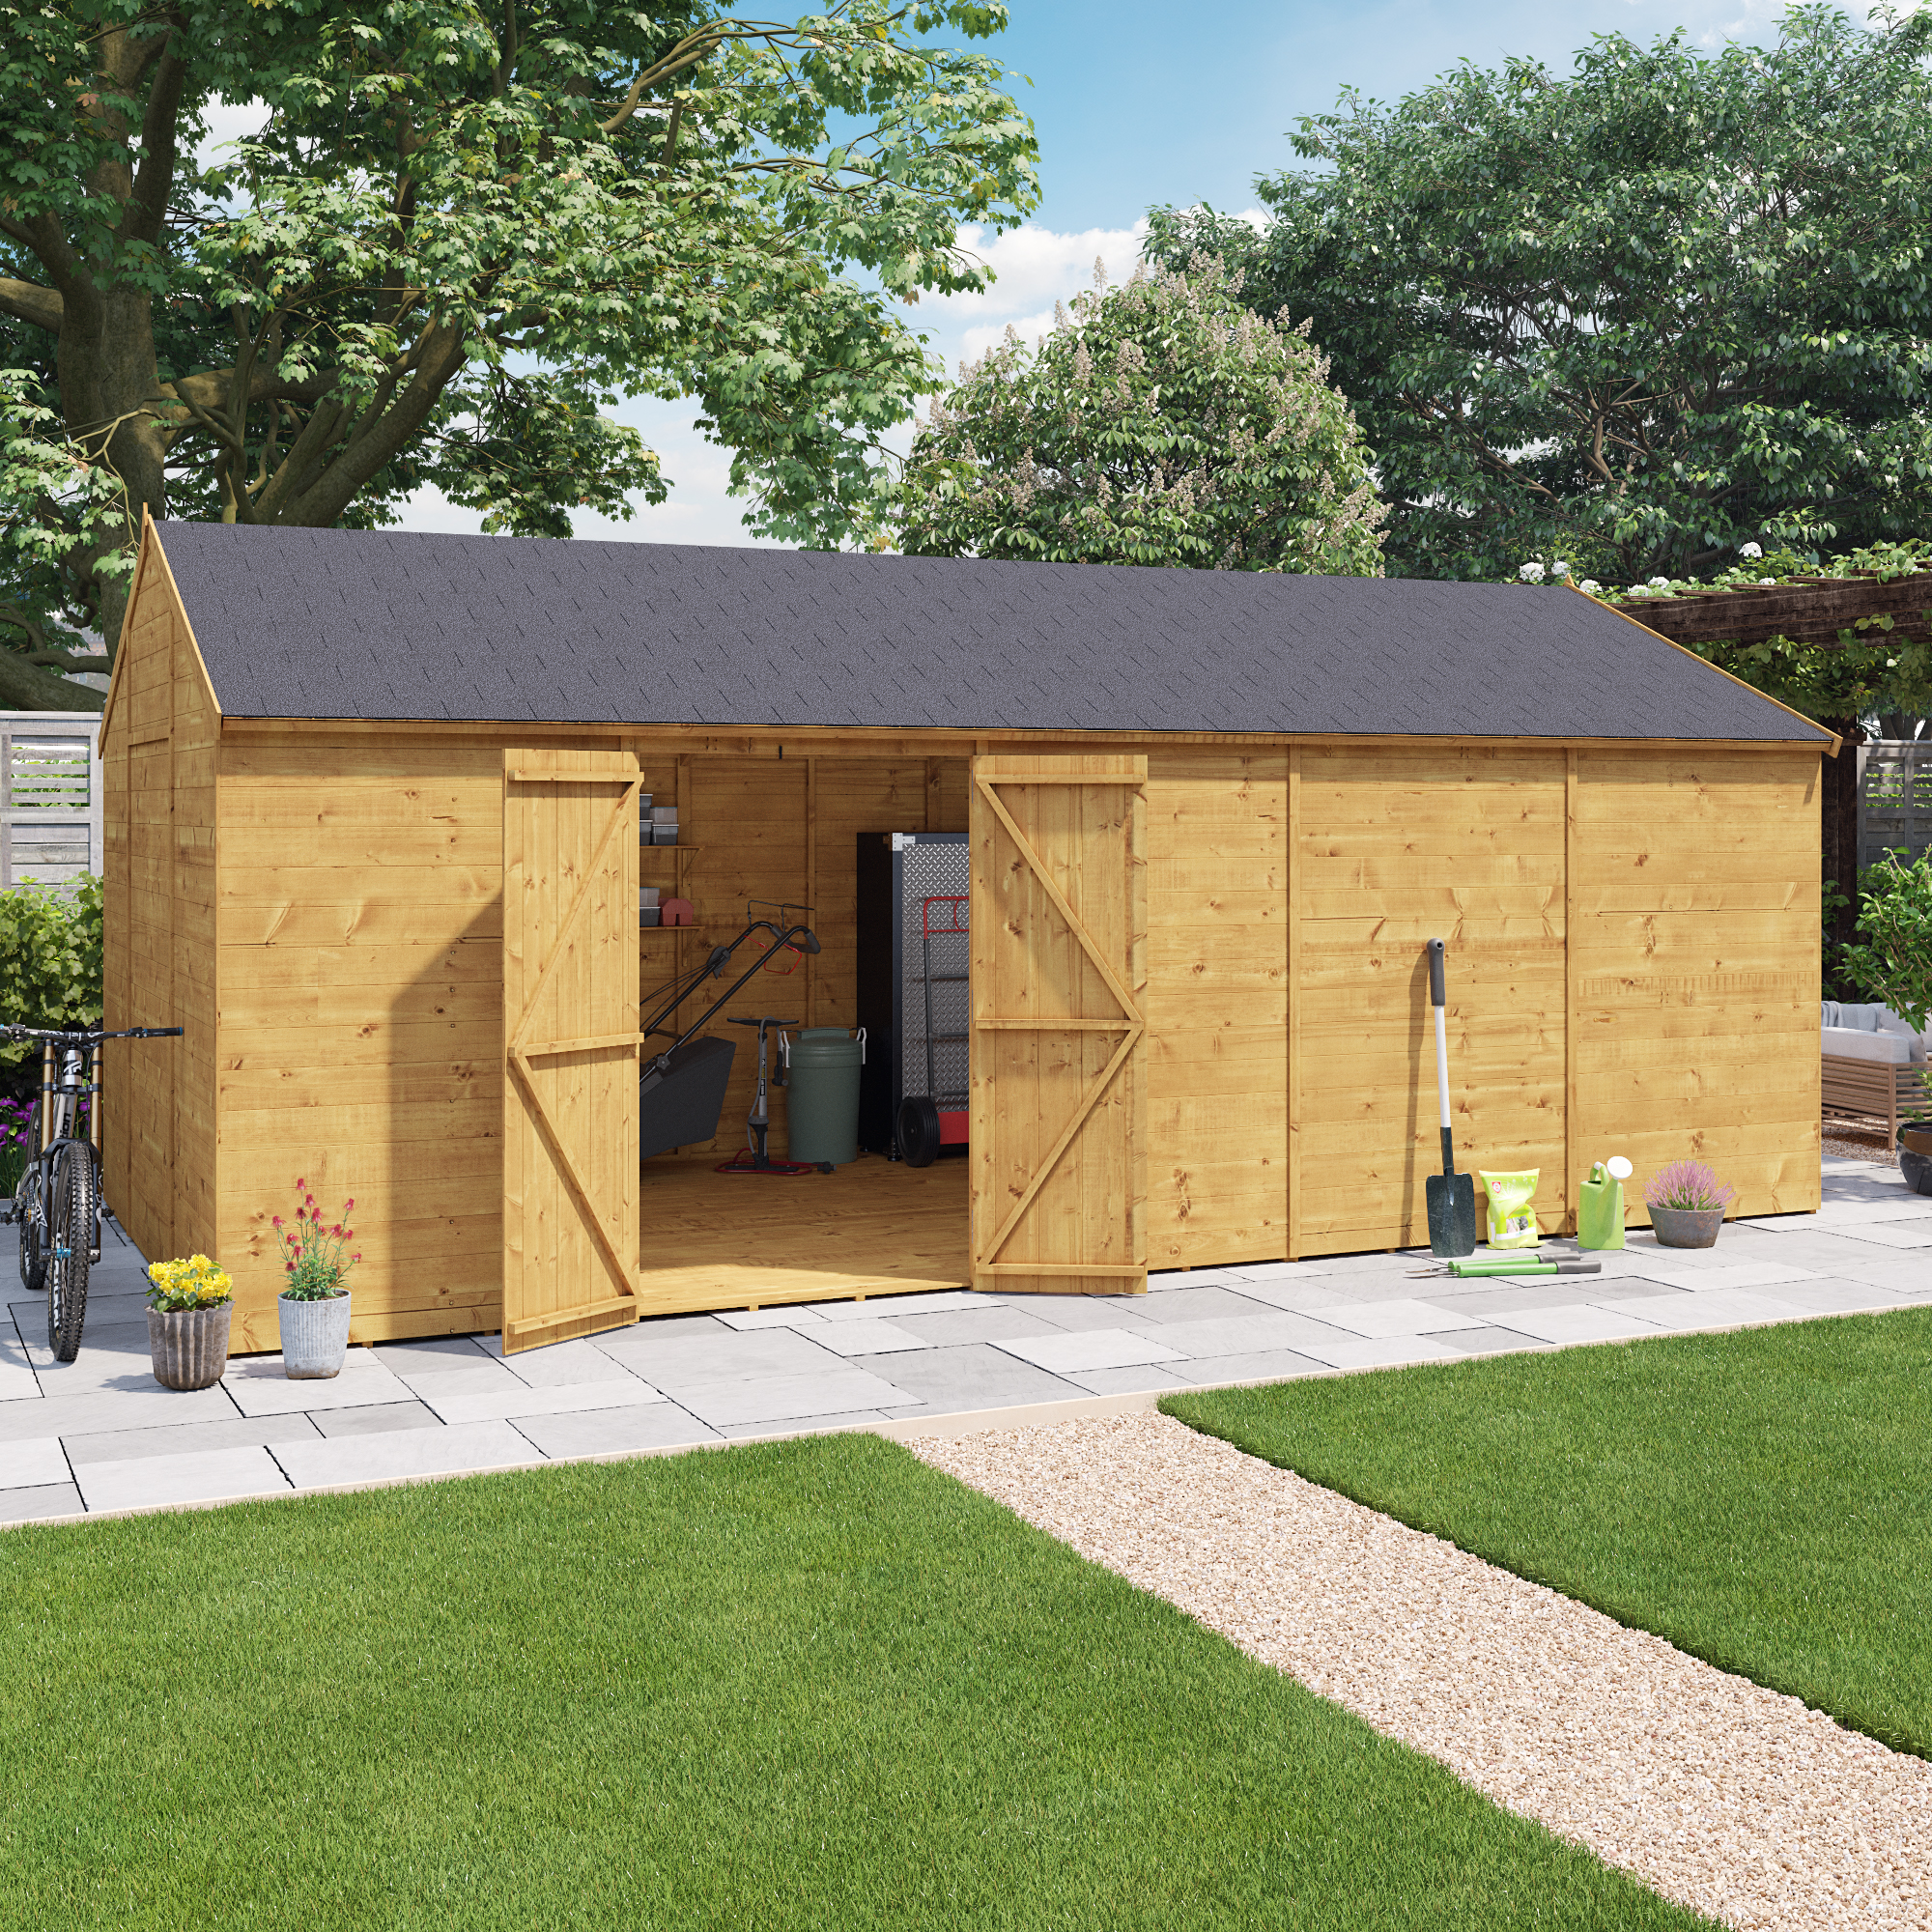 20 x 10 Pressure Treated Shed - BillyOh Expert Reverse Workshop Large Garden Shed - Windowless